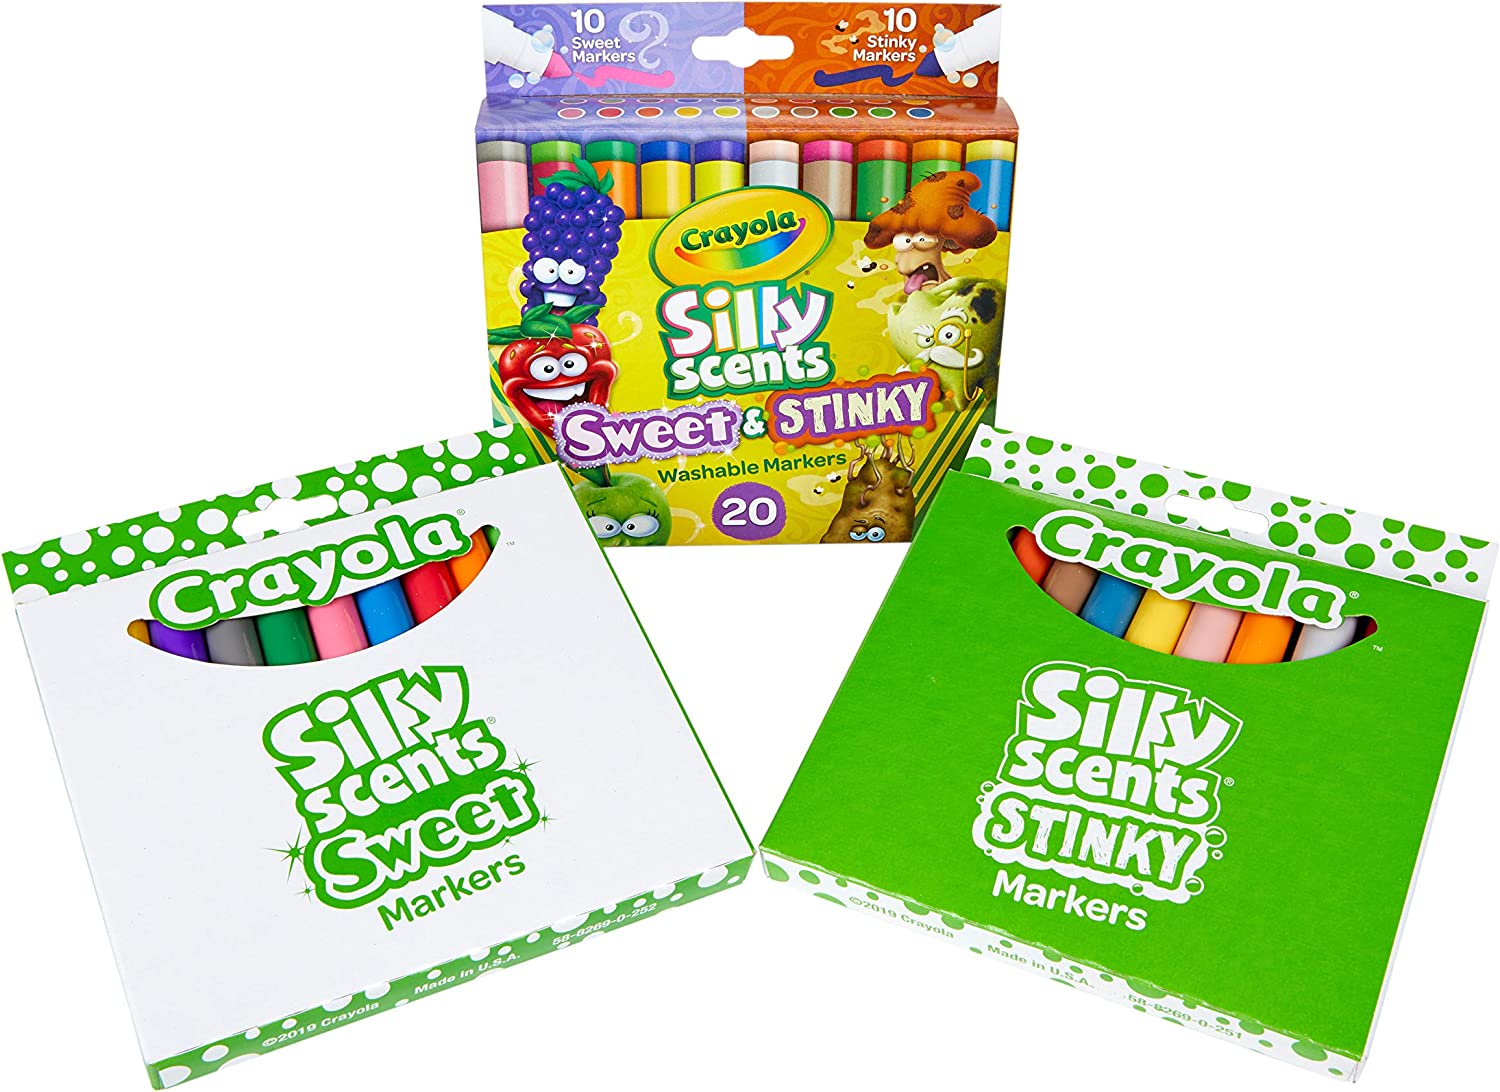 Silly scents markers by Crayola showing the contents of the packaging. 